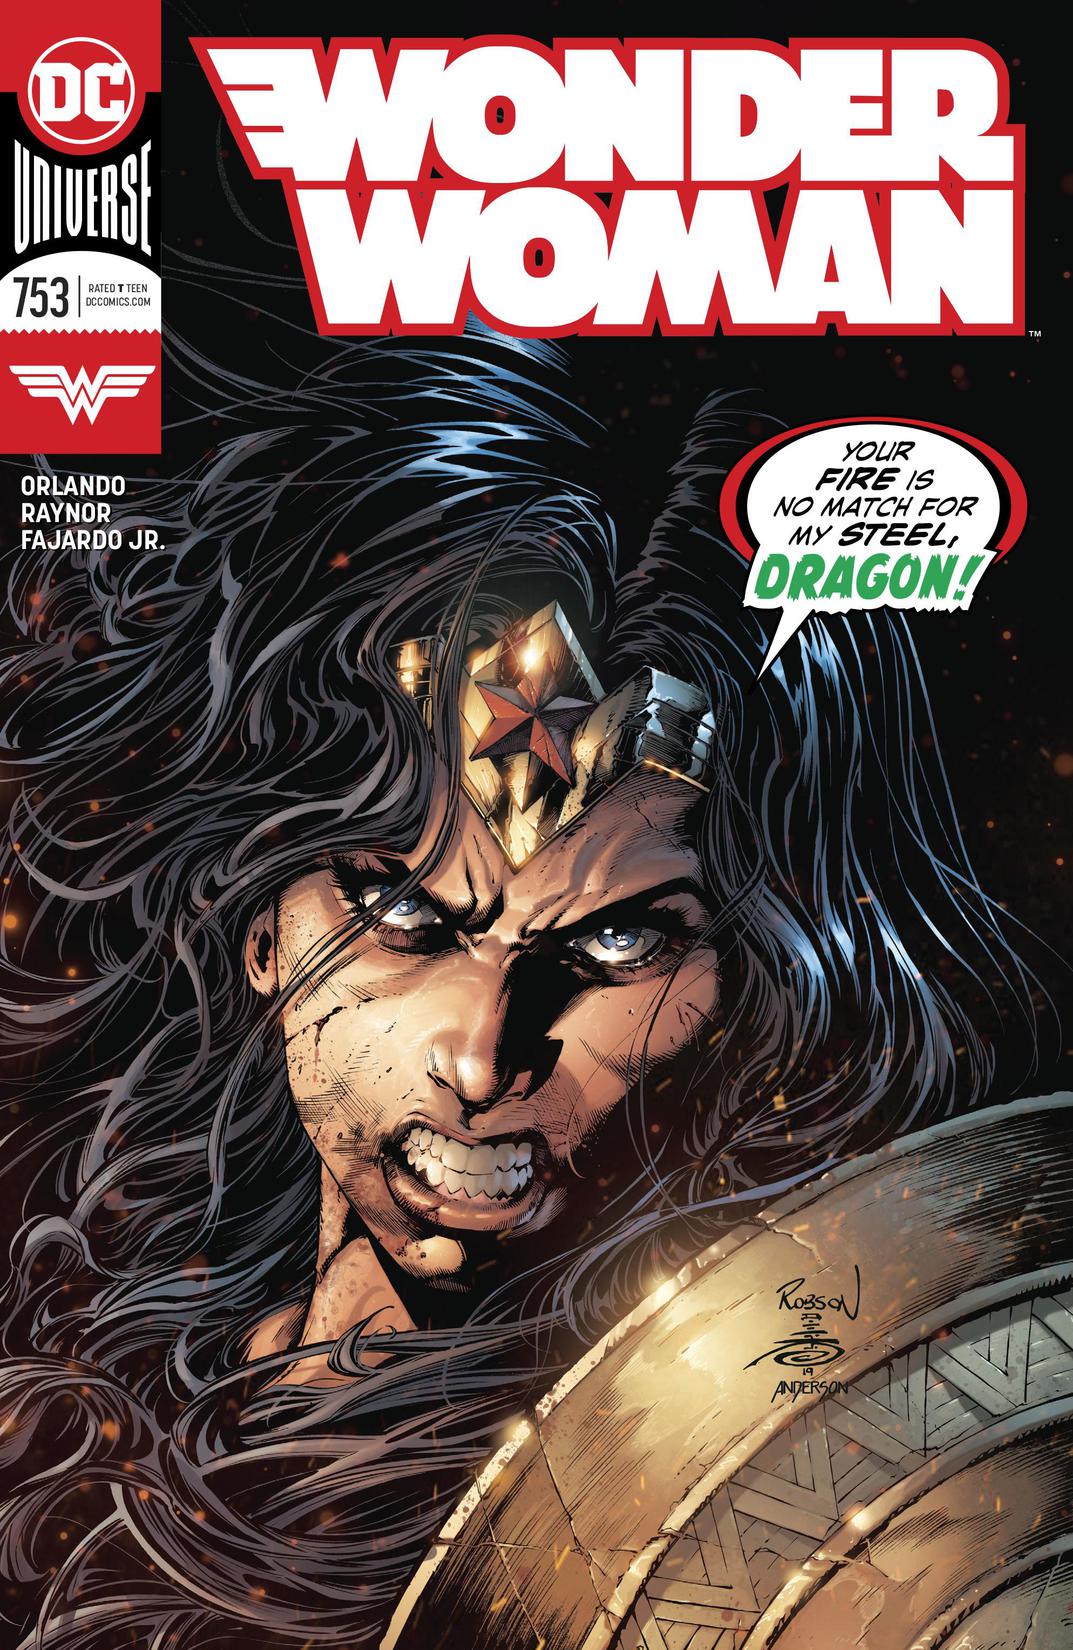 Wonder Woman (2016-) #753 preview images